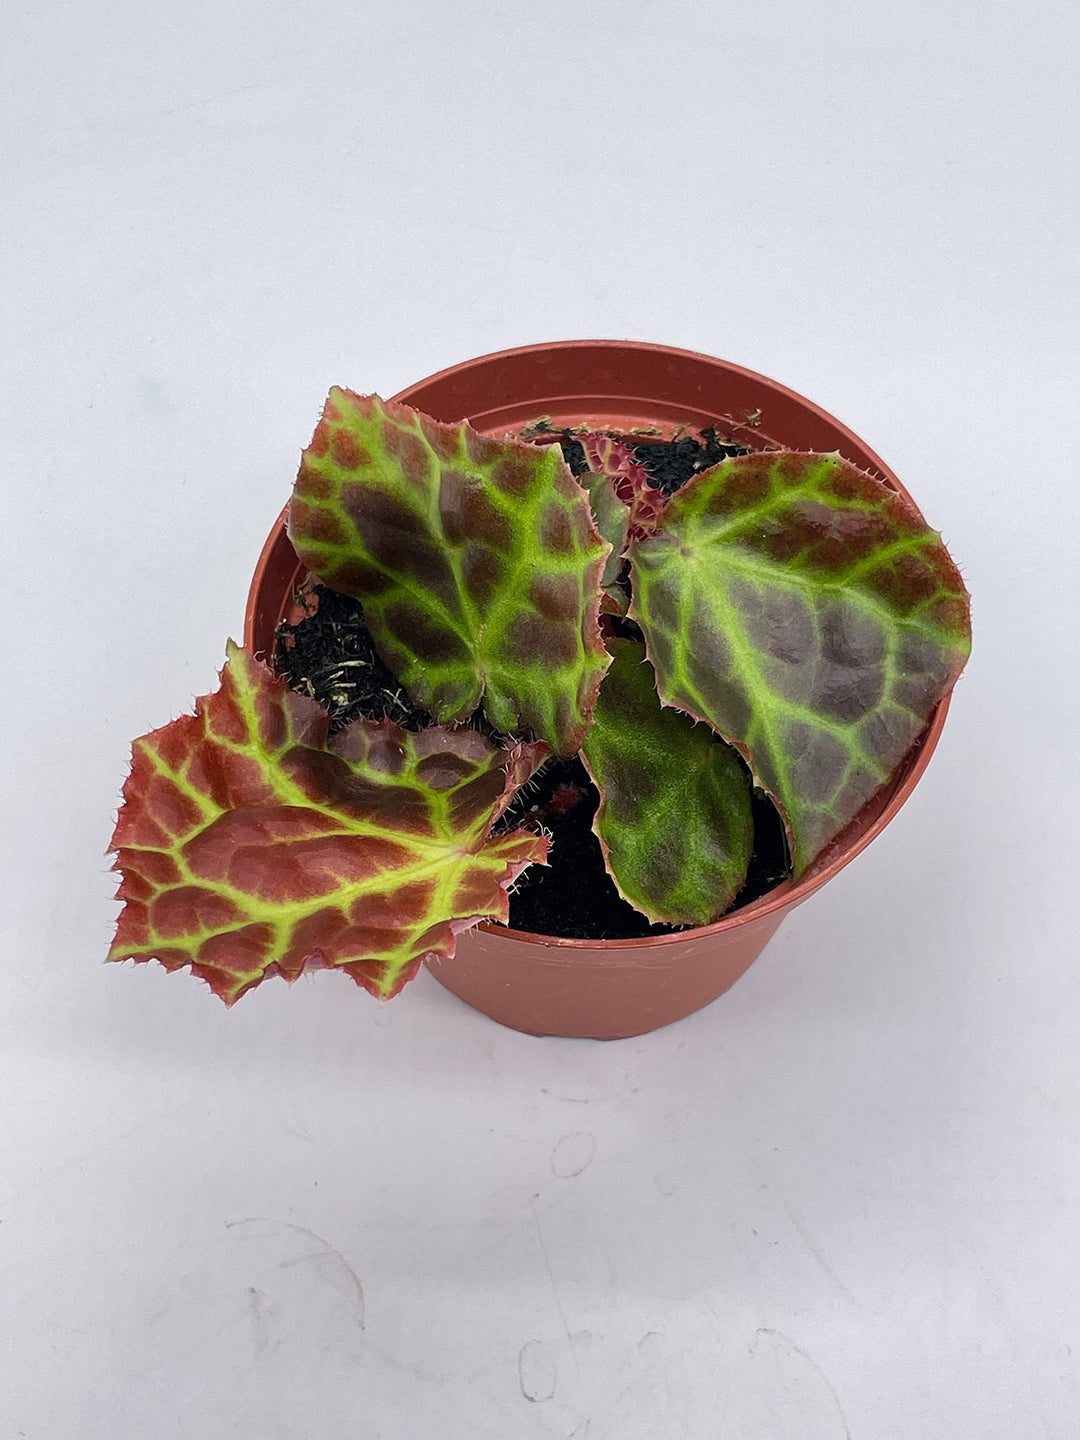 Begonia rajah, 4 inch Pot, Extremely Rare Homegrown Exclusive